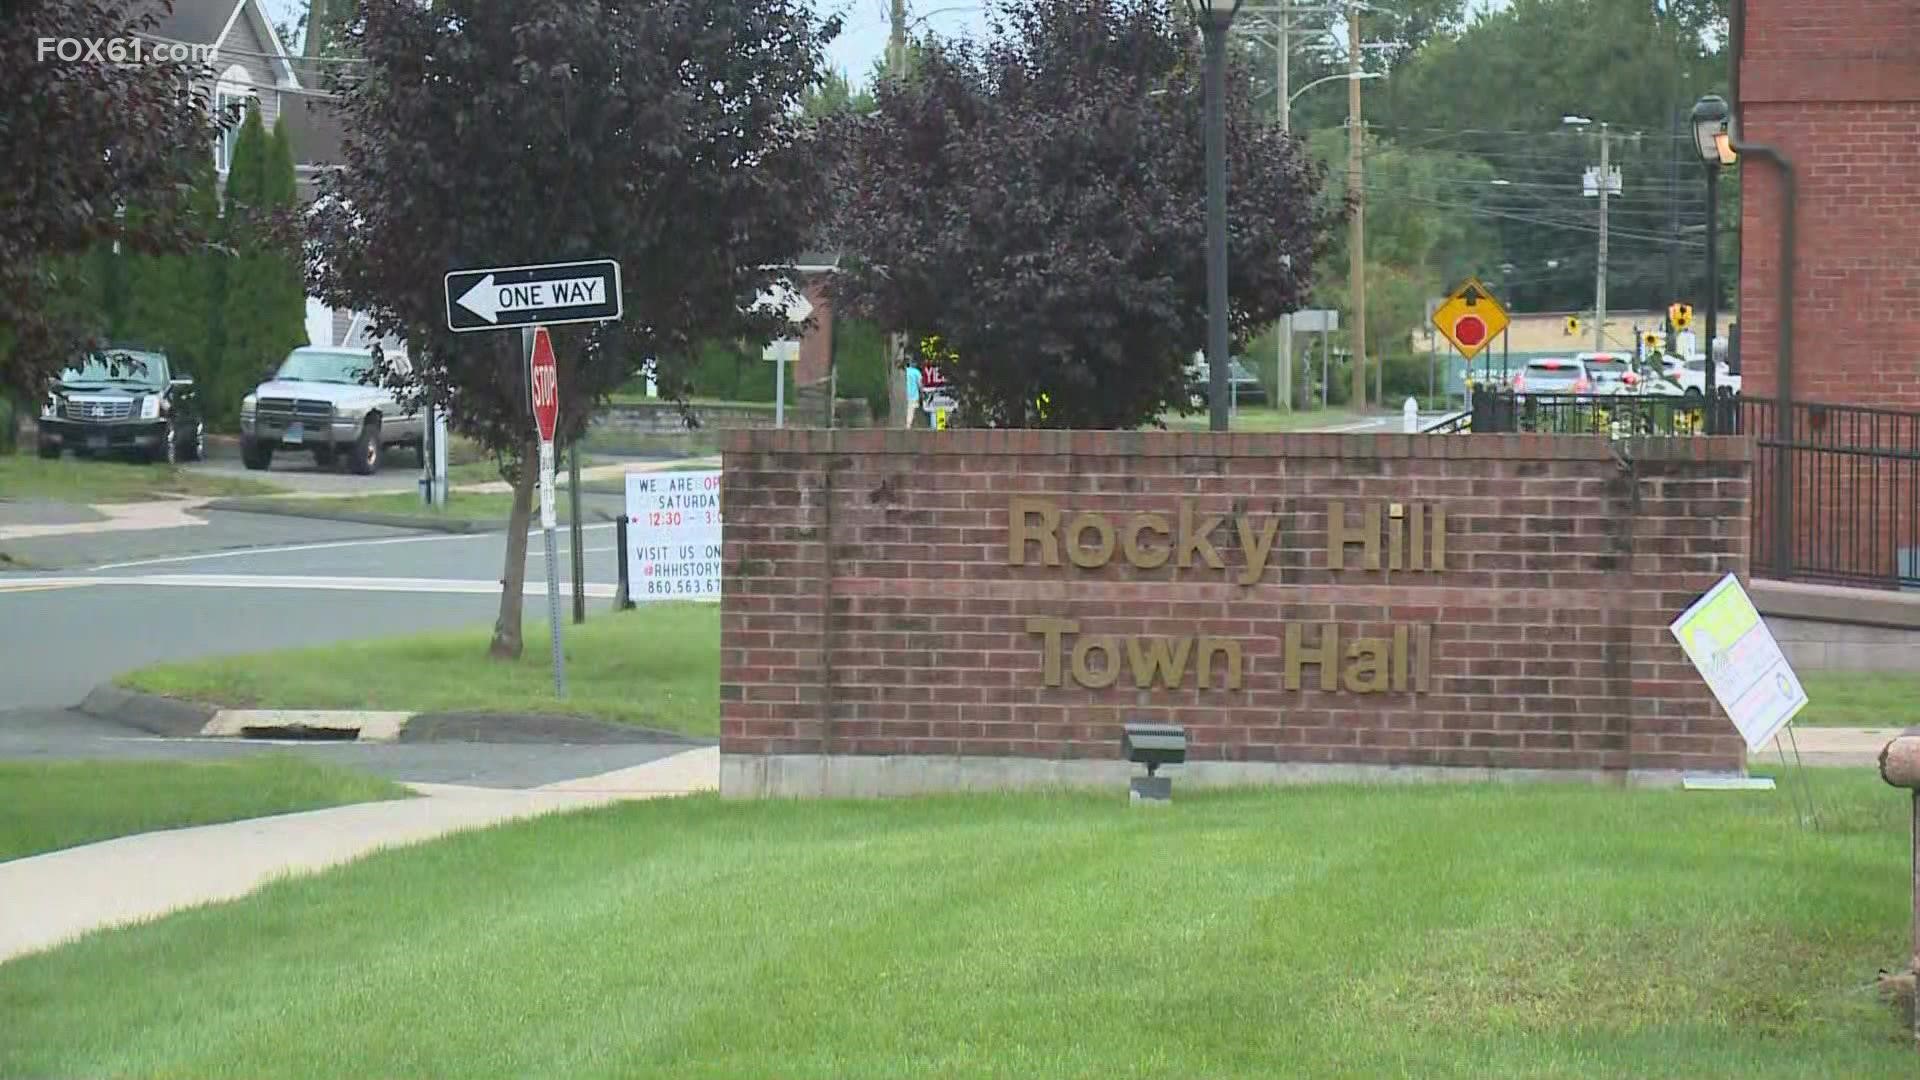 Rocky Hill leaders are circulating a petition calling on lawmakers to take up the issues of car break-ins and thefts in a special session.